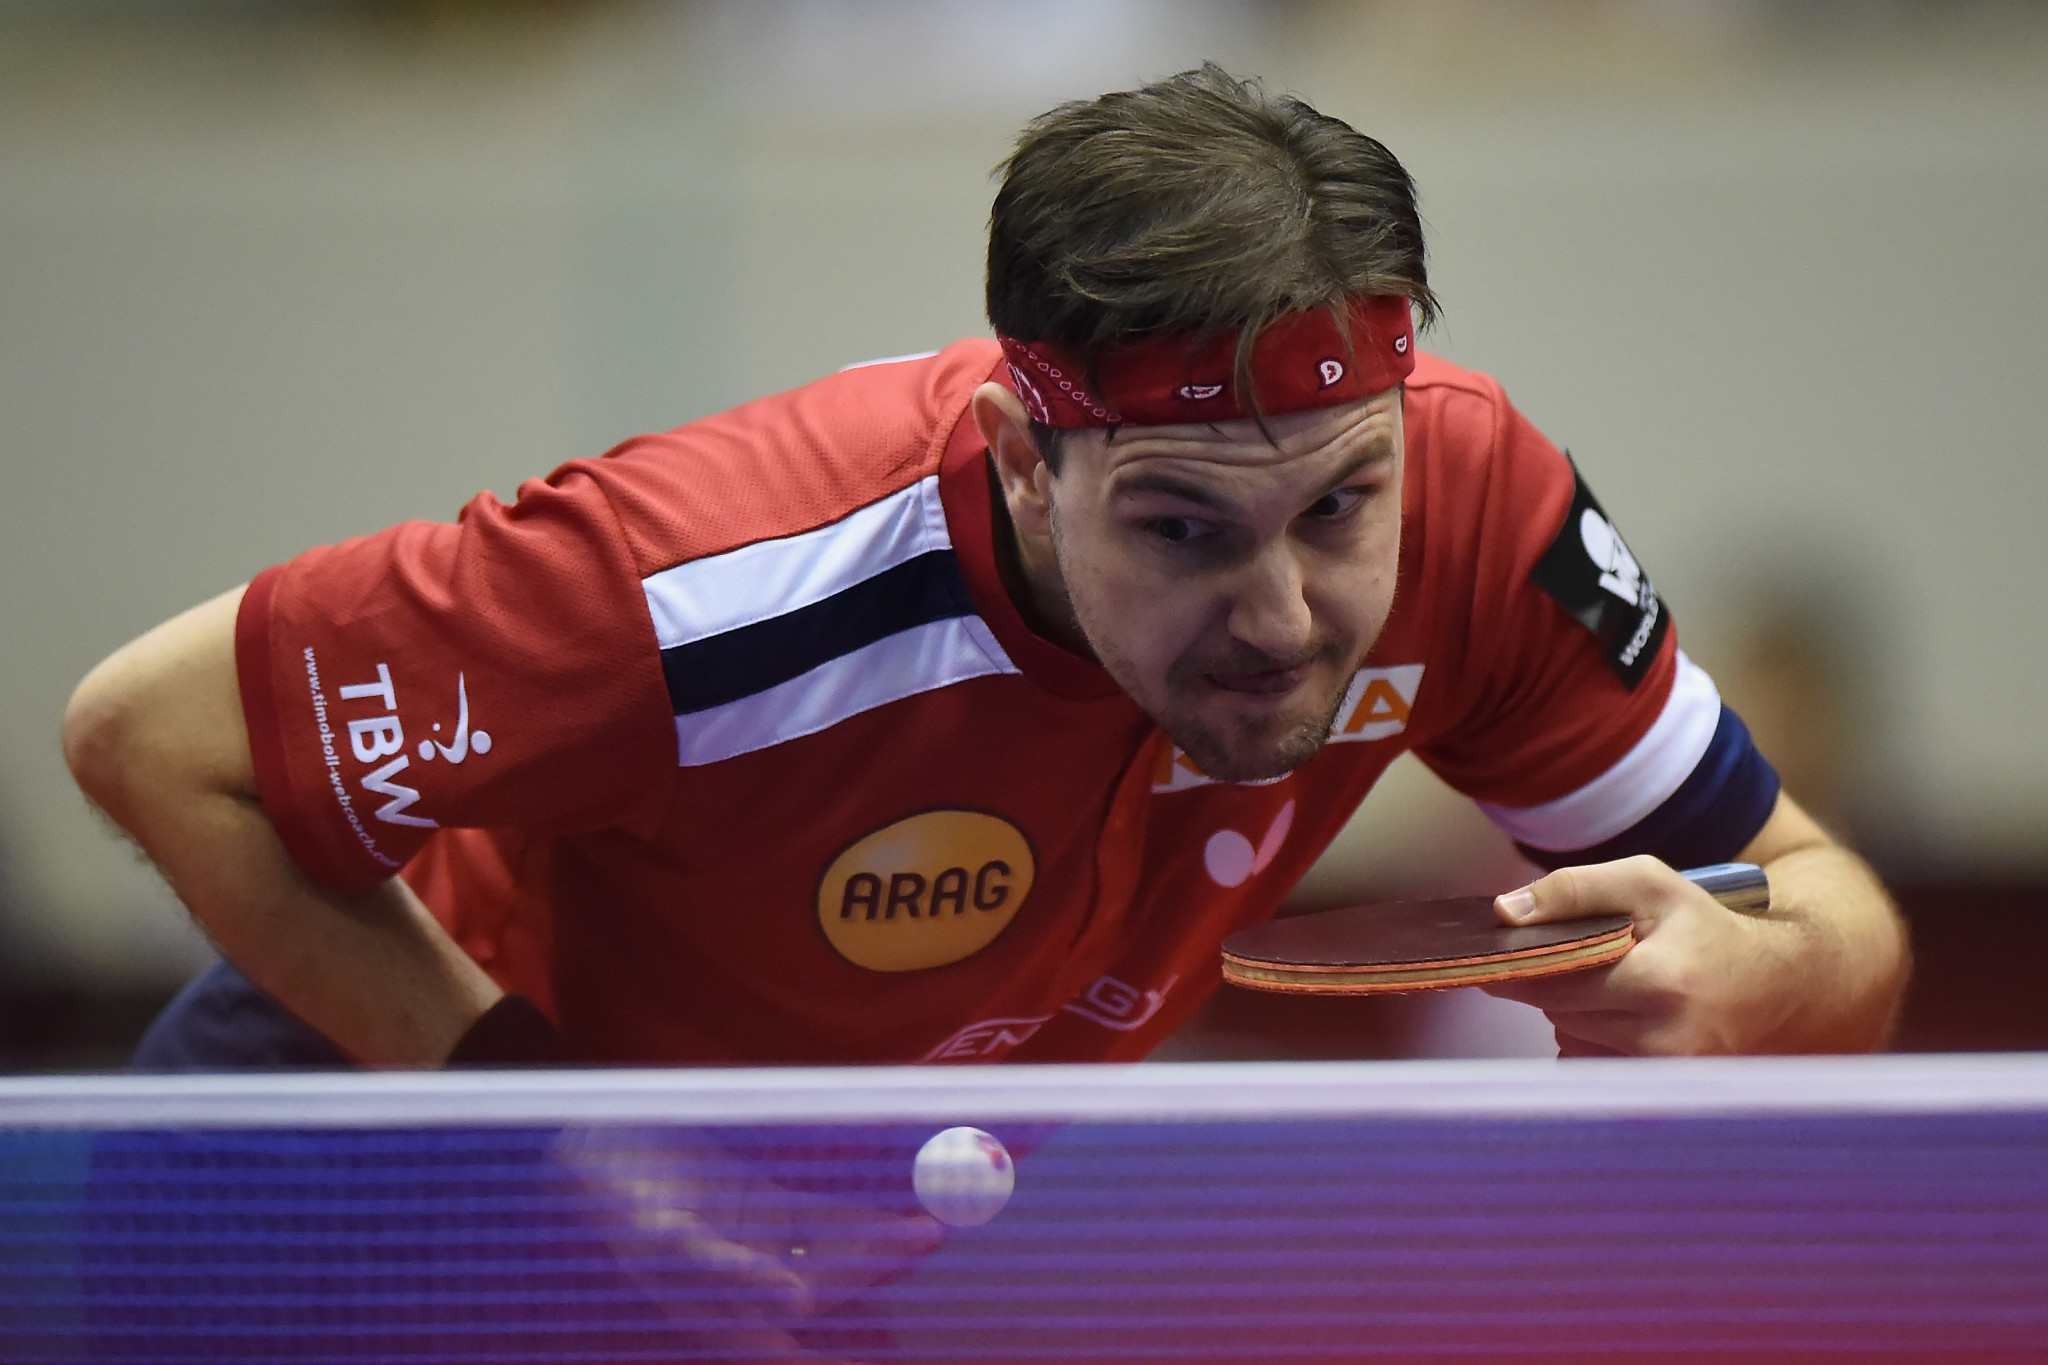 Timo Boll remains on course t defend his title at the Europe Top 16 Cup ©Getty Images